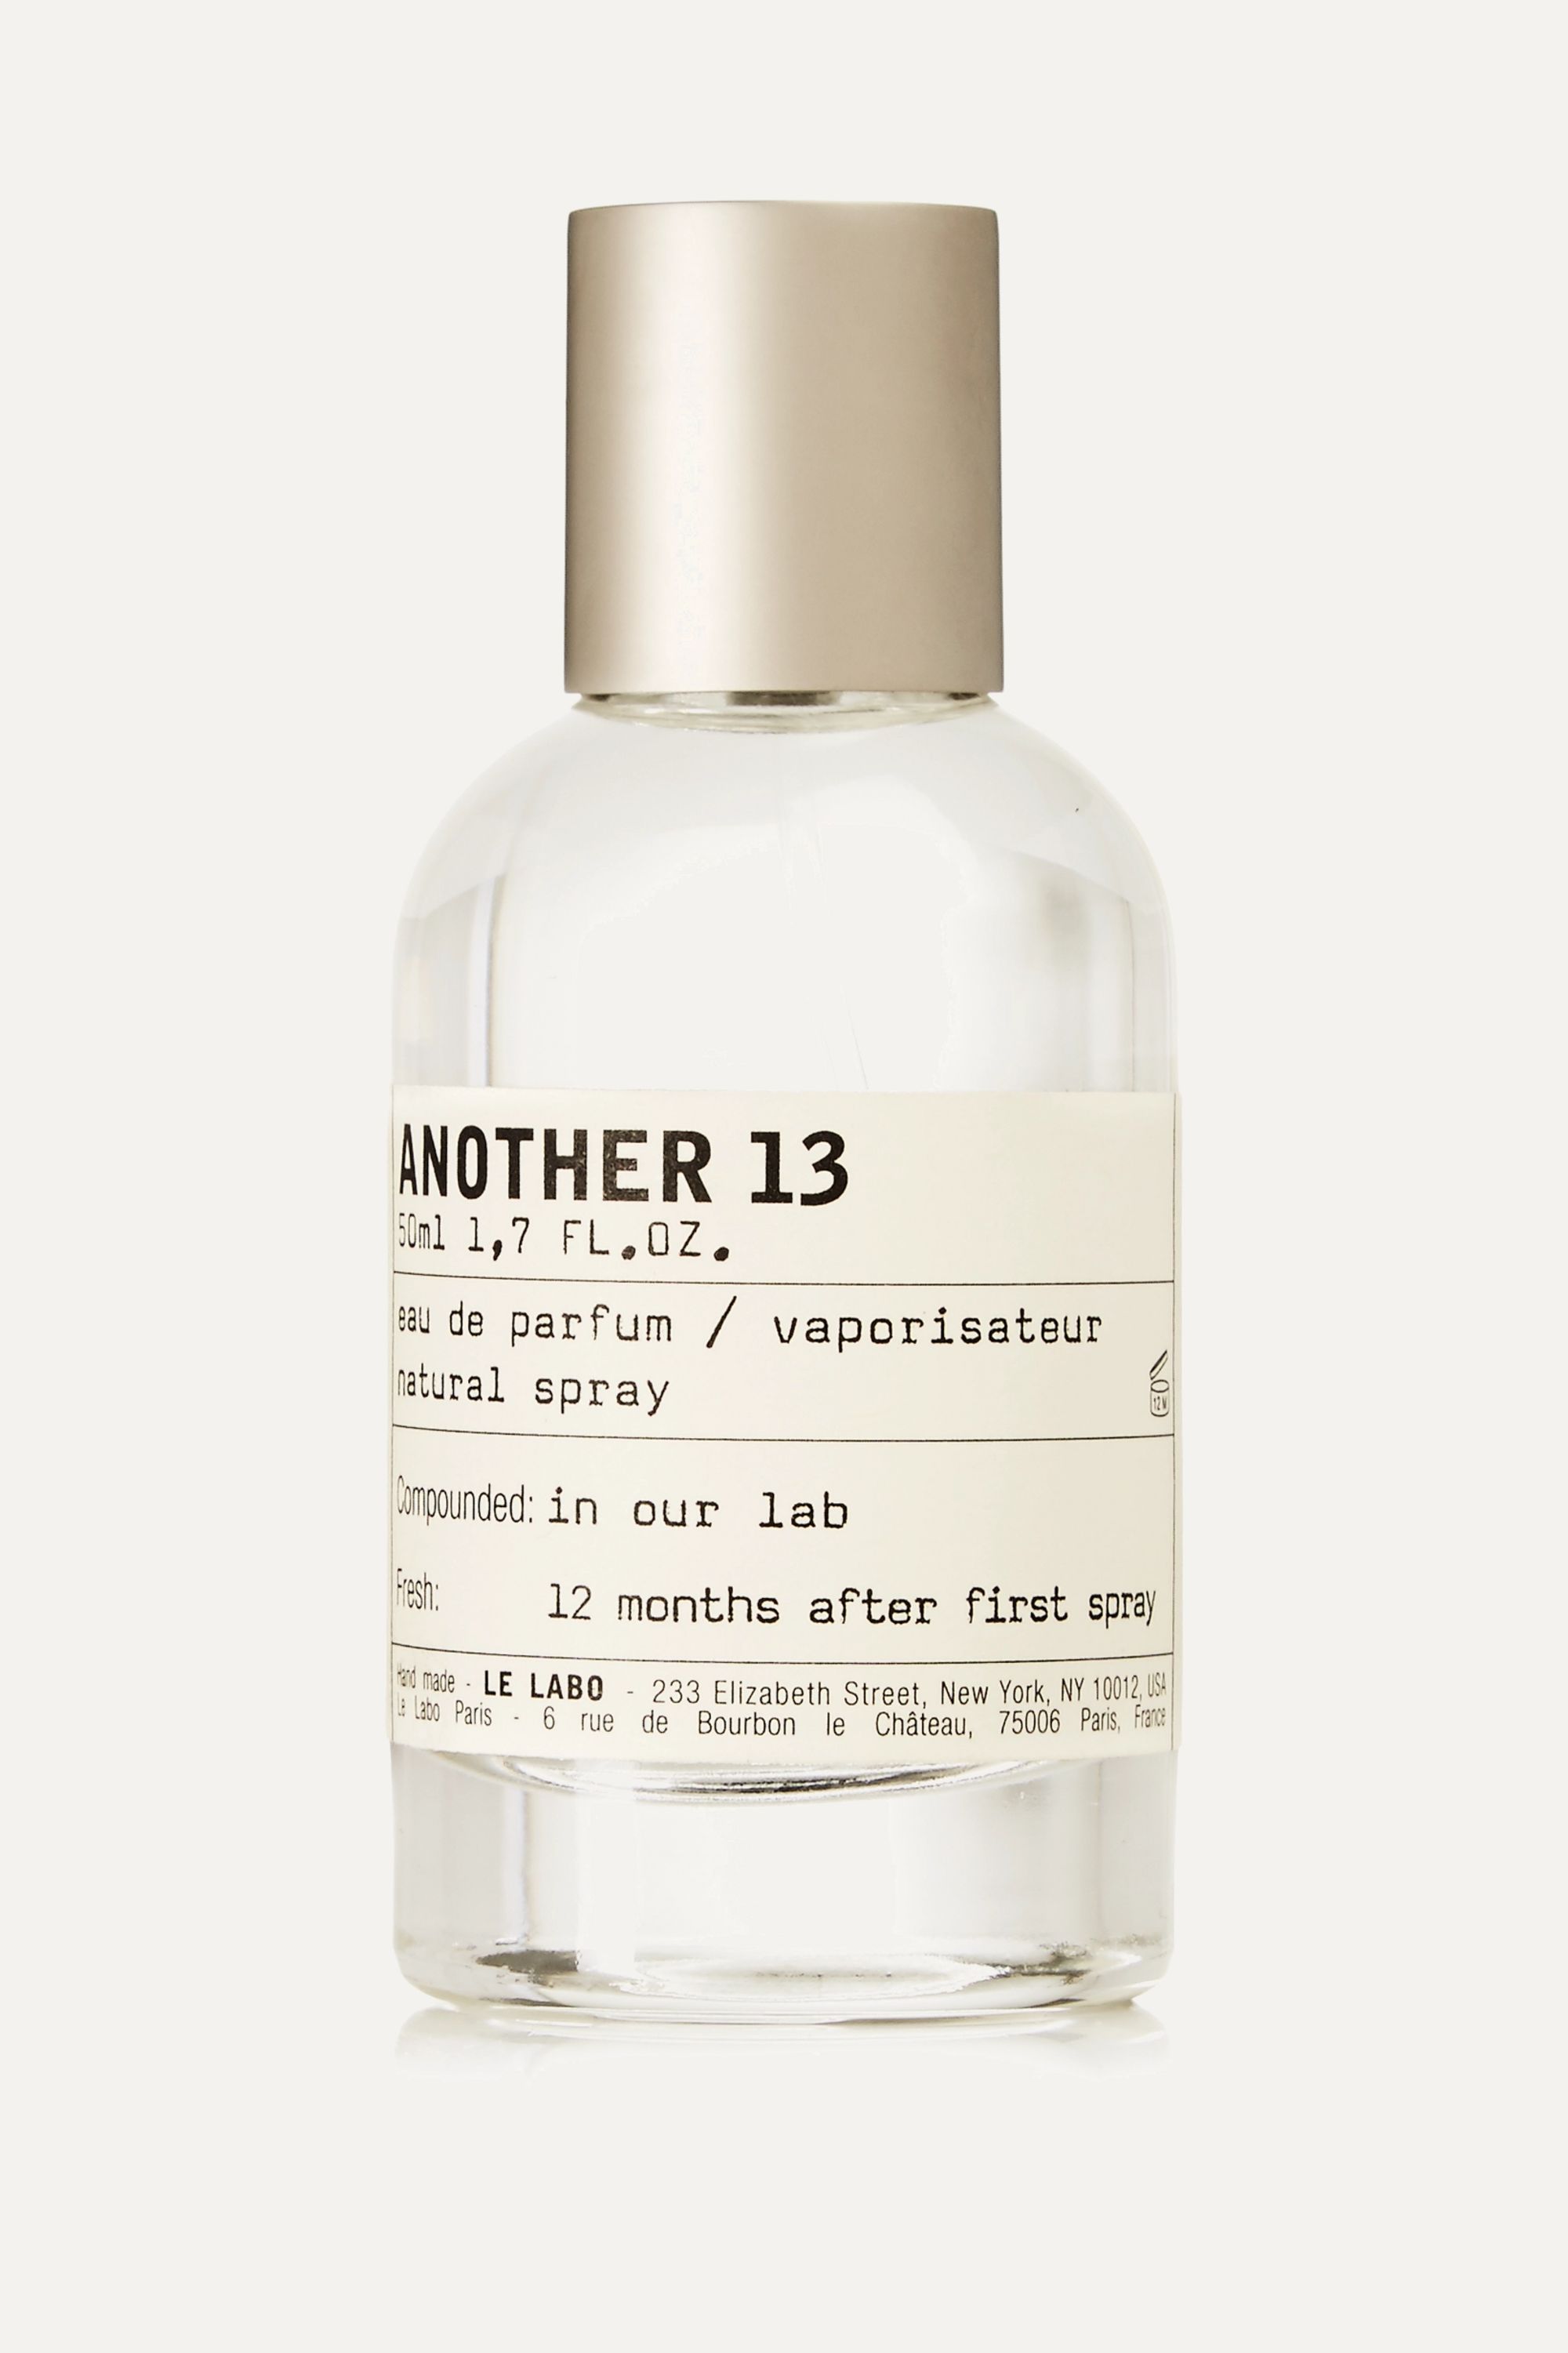 Another 13 купить. Духи Ле Лабо 13. Le Labo парфюмерная вода another 13. Le Labo another 13 100 ml. Духи Santal another 13.